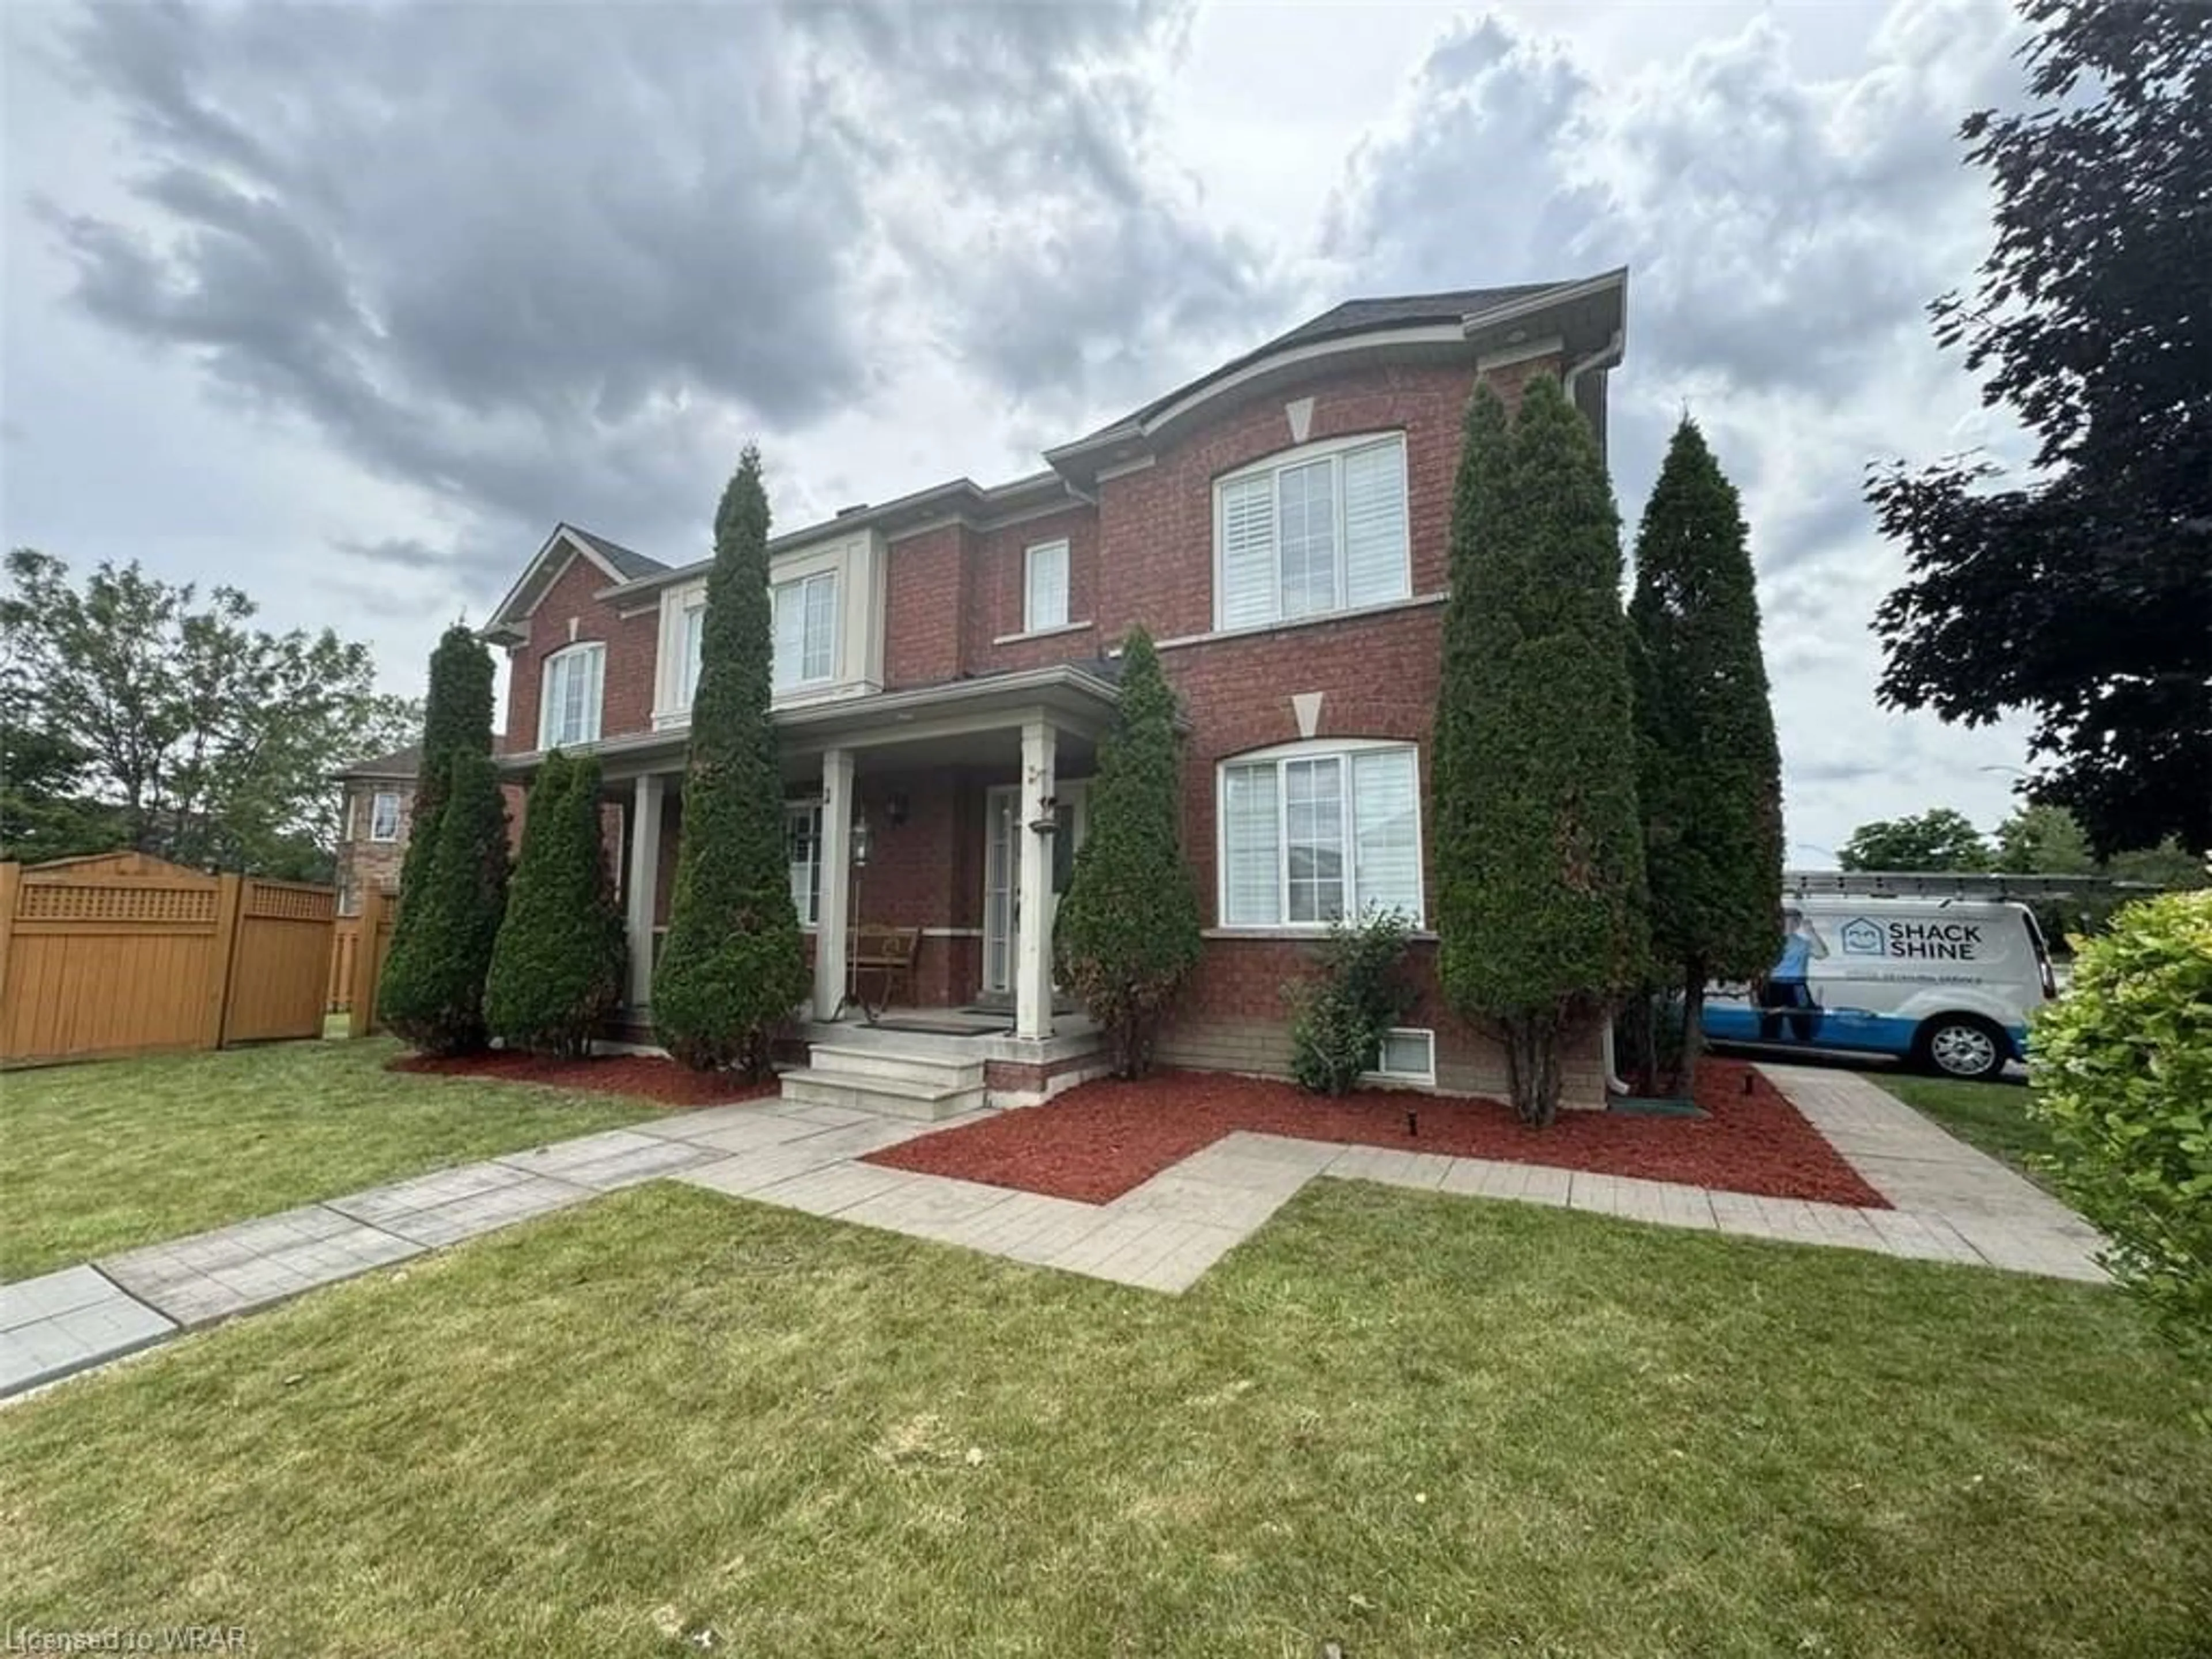 Home with brick exterior material for 3212 Ridgeleigh Hts, Mississauga Ontario L5M 6S6